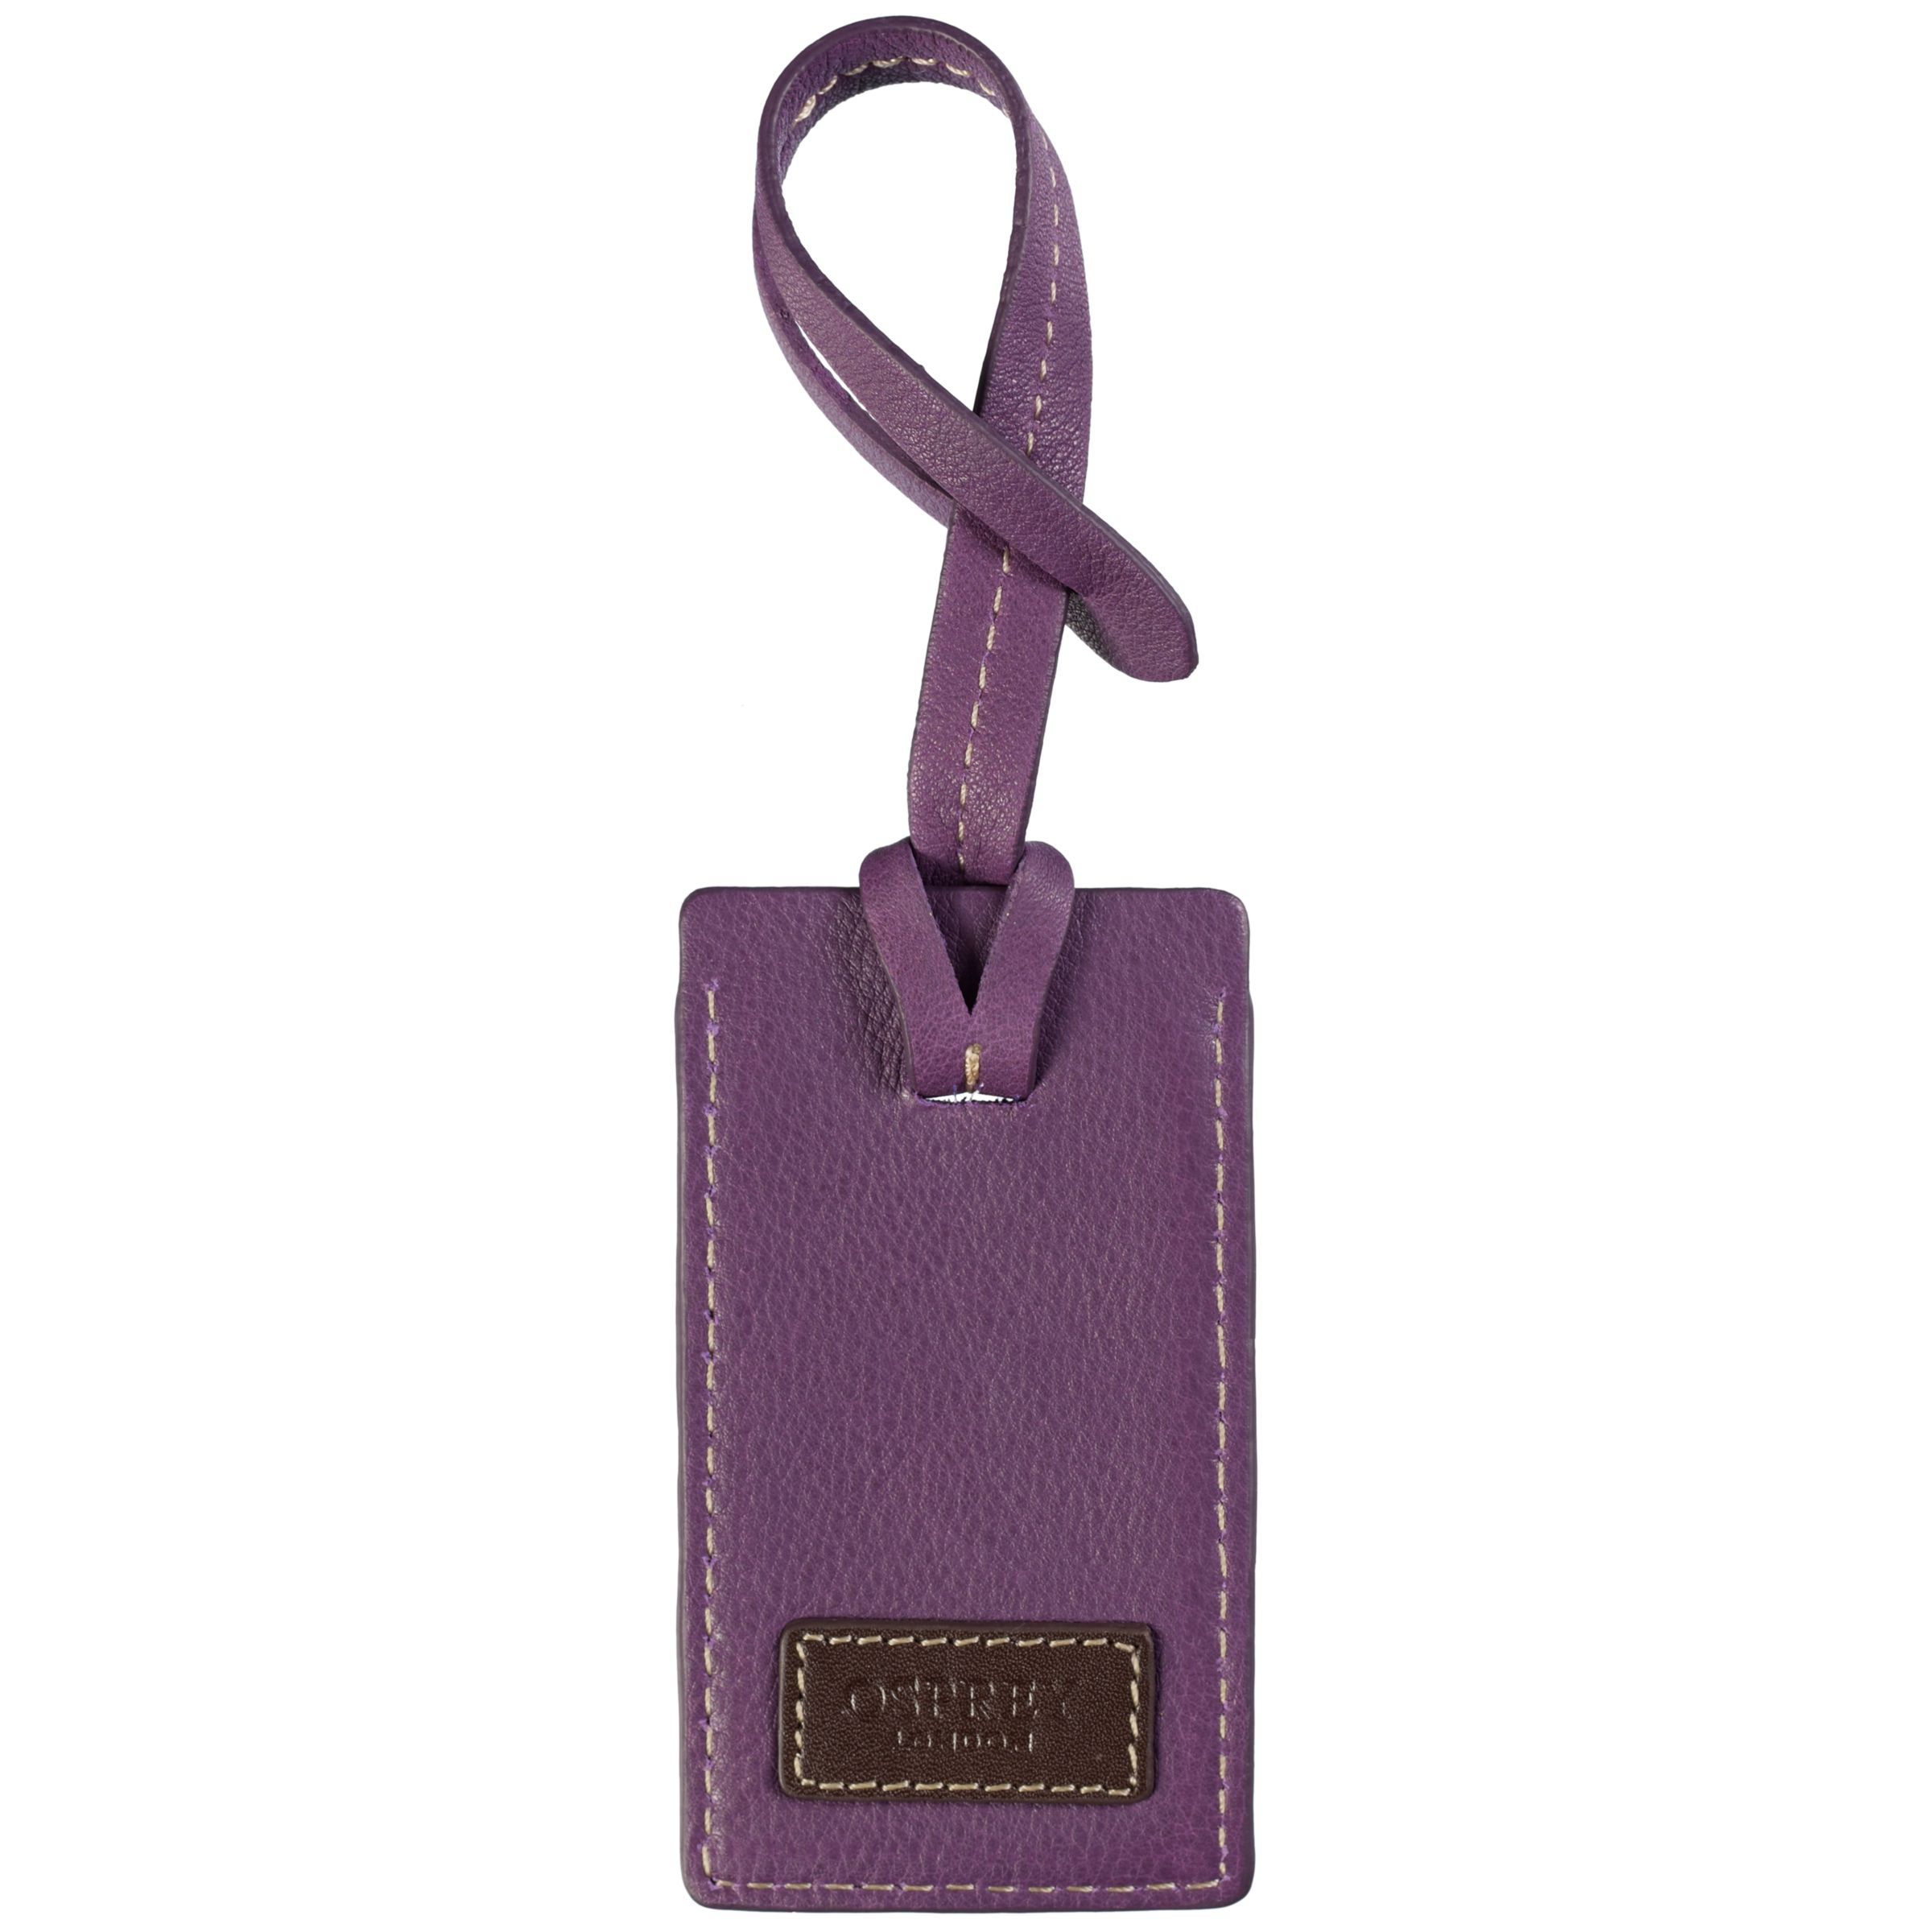 Osprey London The Mayes Leather Luggage Tag PurpleTravel in style!